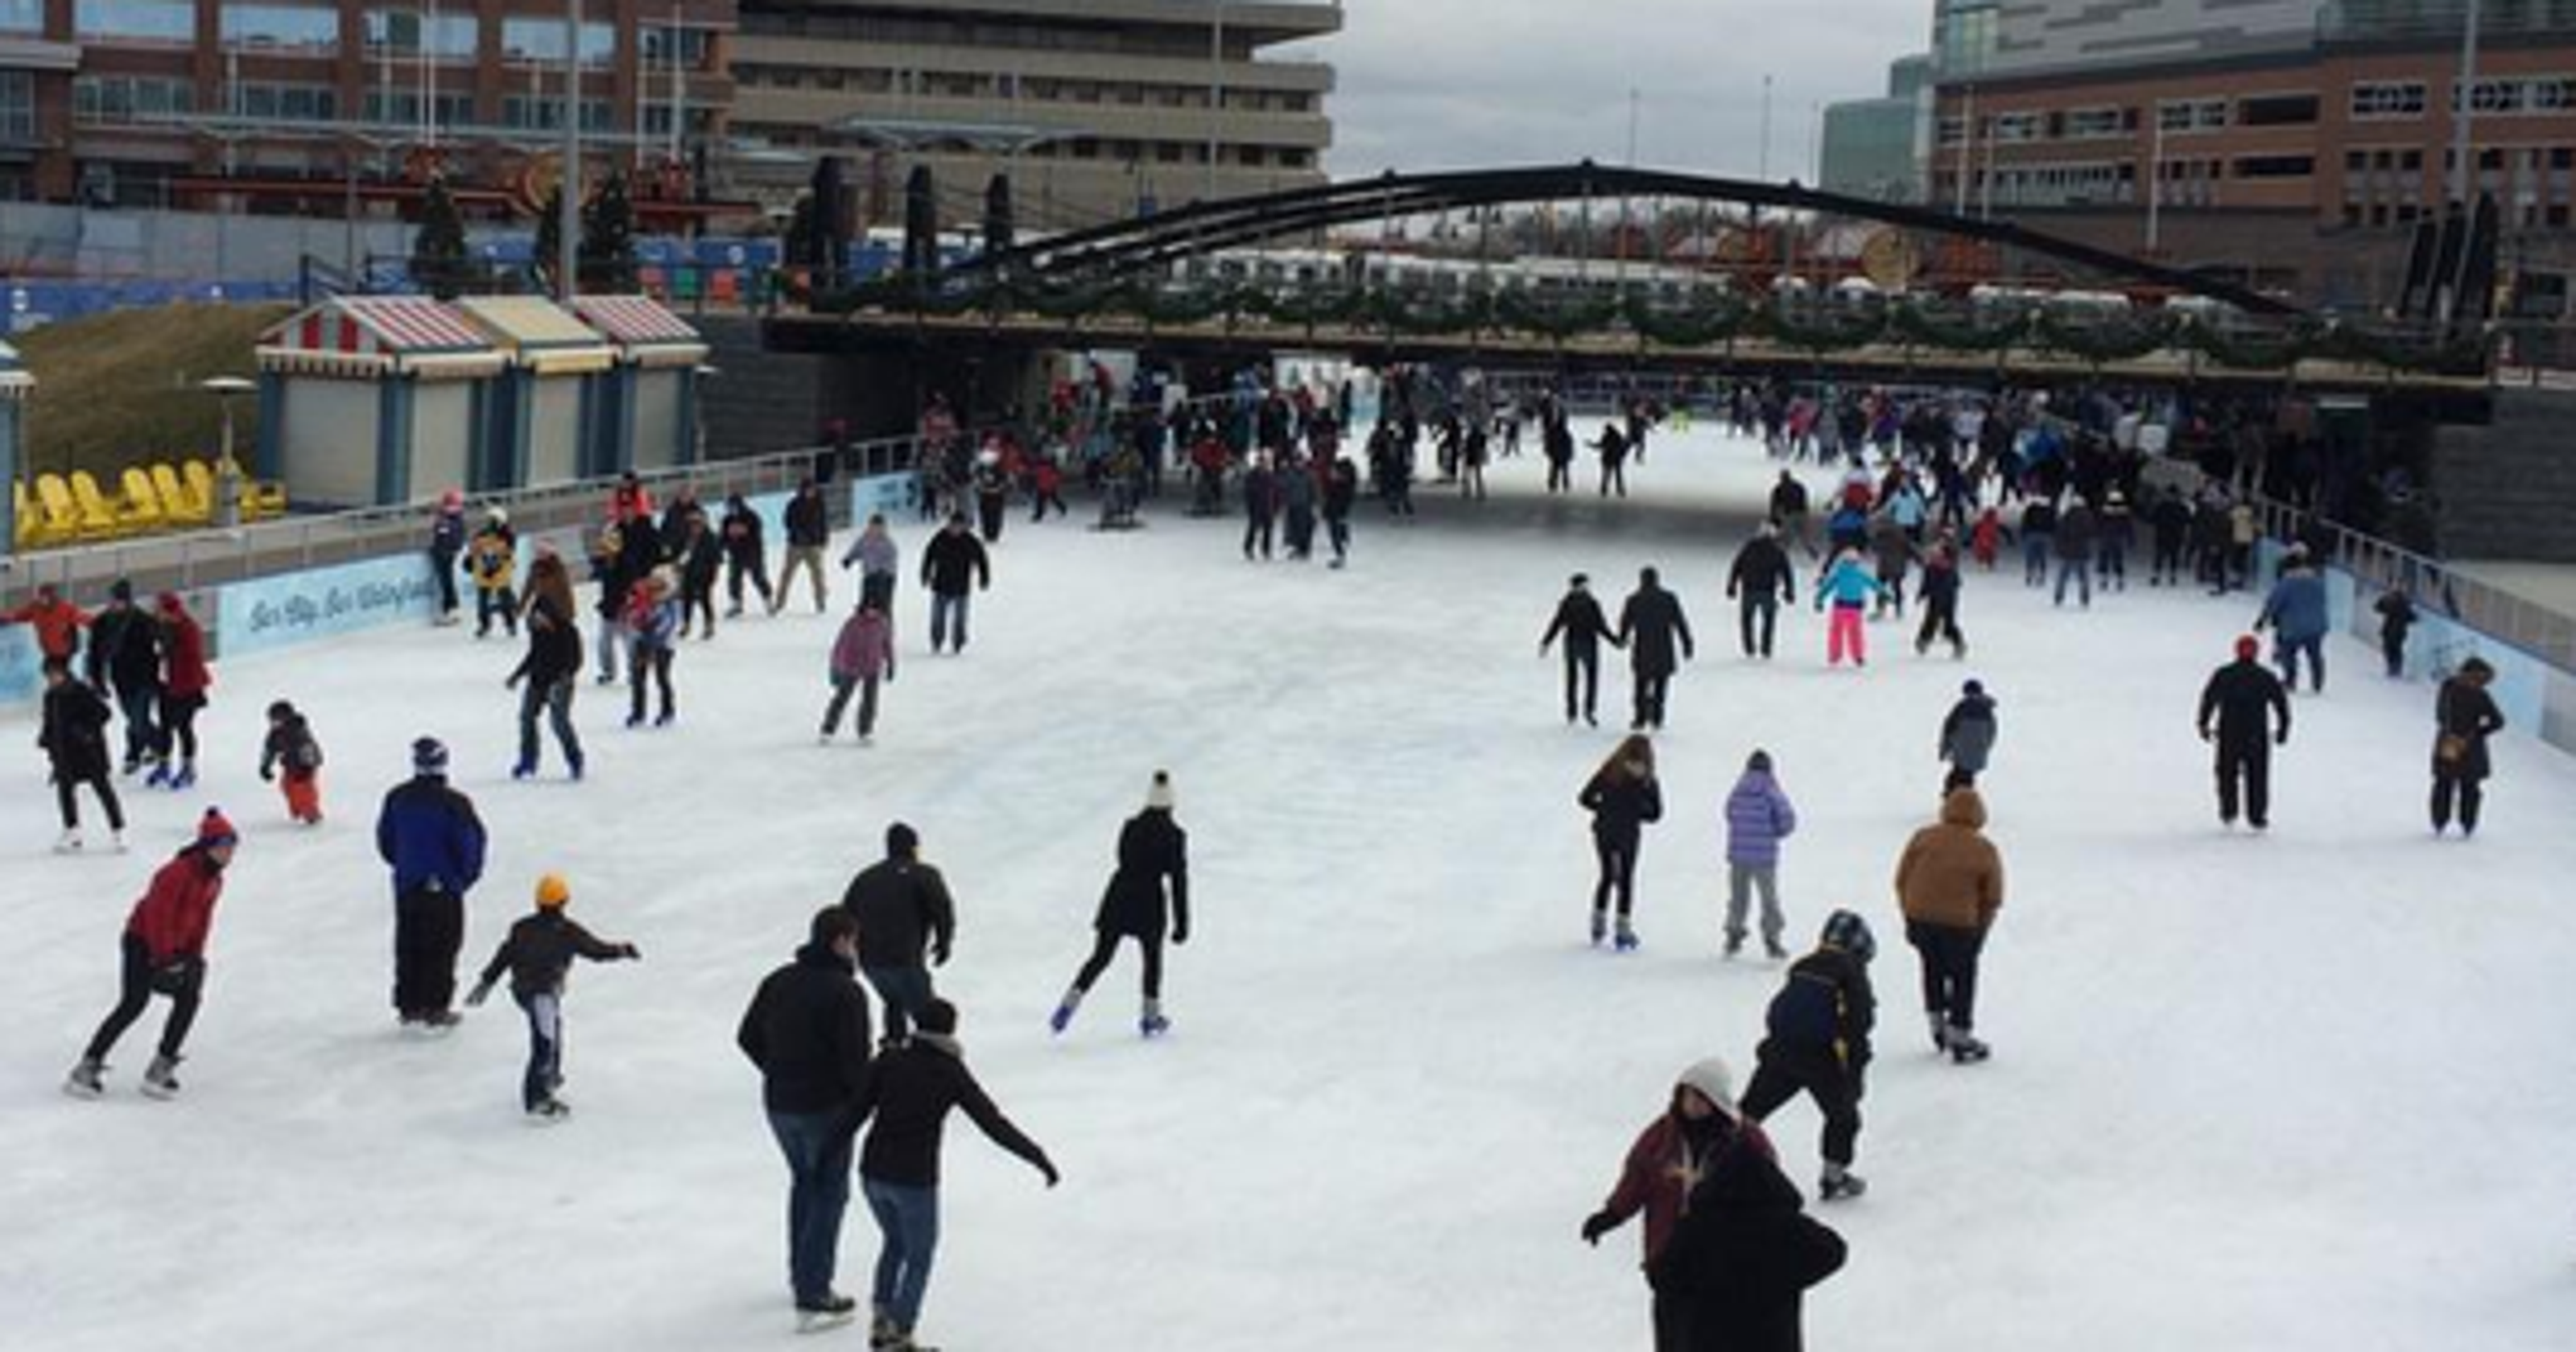 Outdoor ice rink planned for Nashville's NHL AllStar Weekend